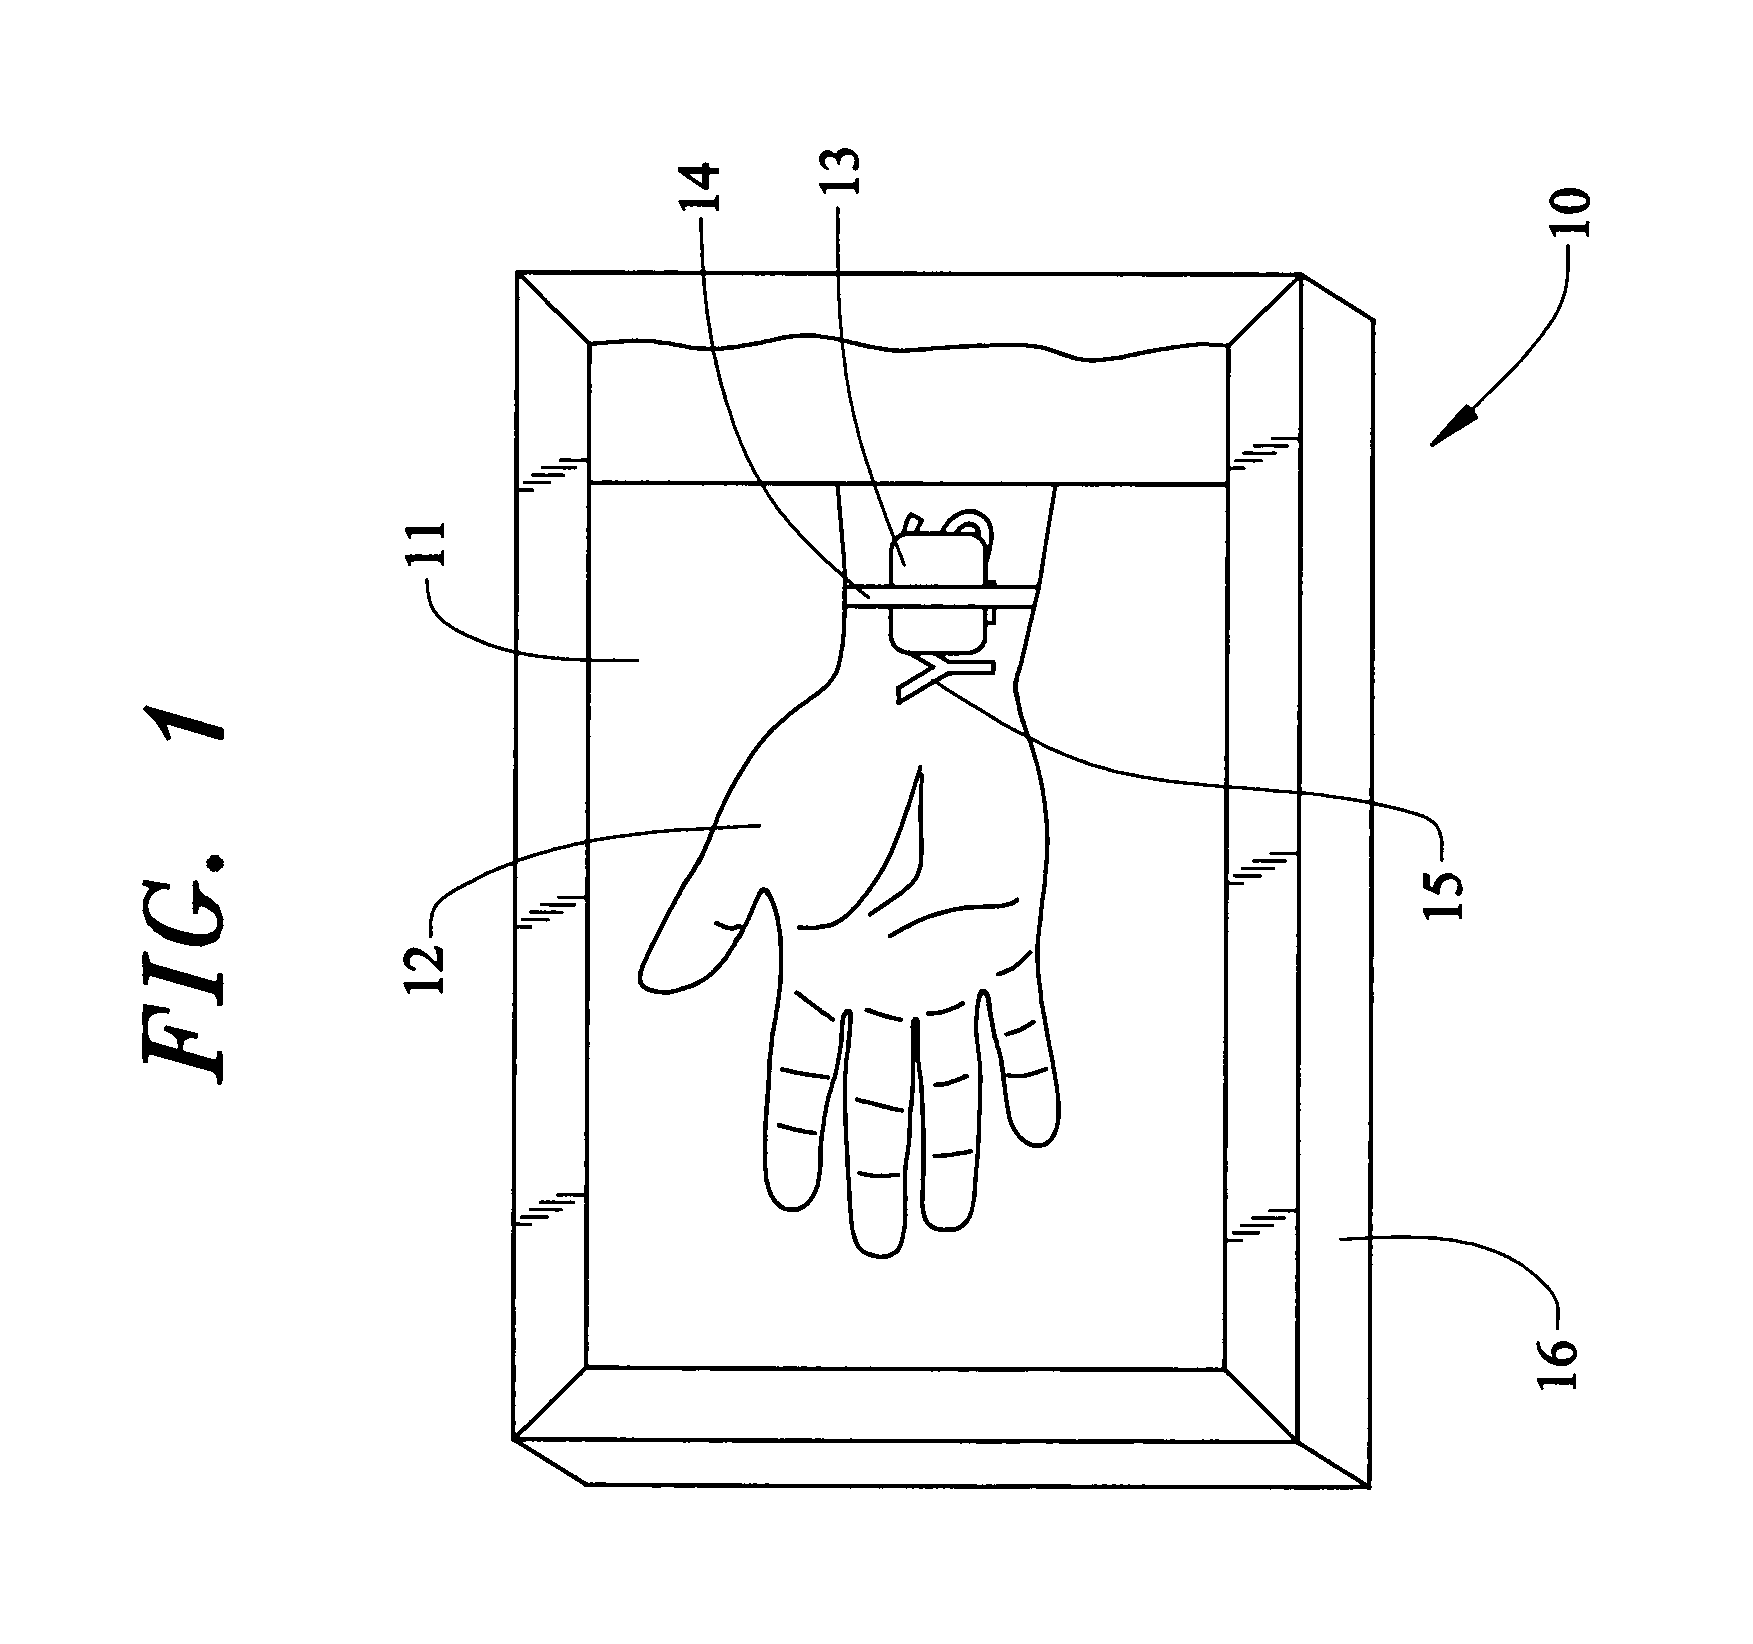 Surgical safety procedure and apparatus